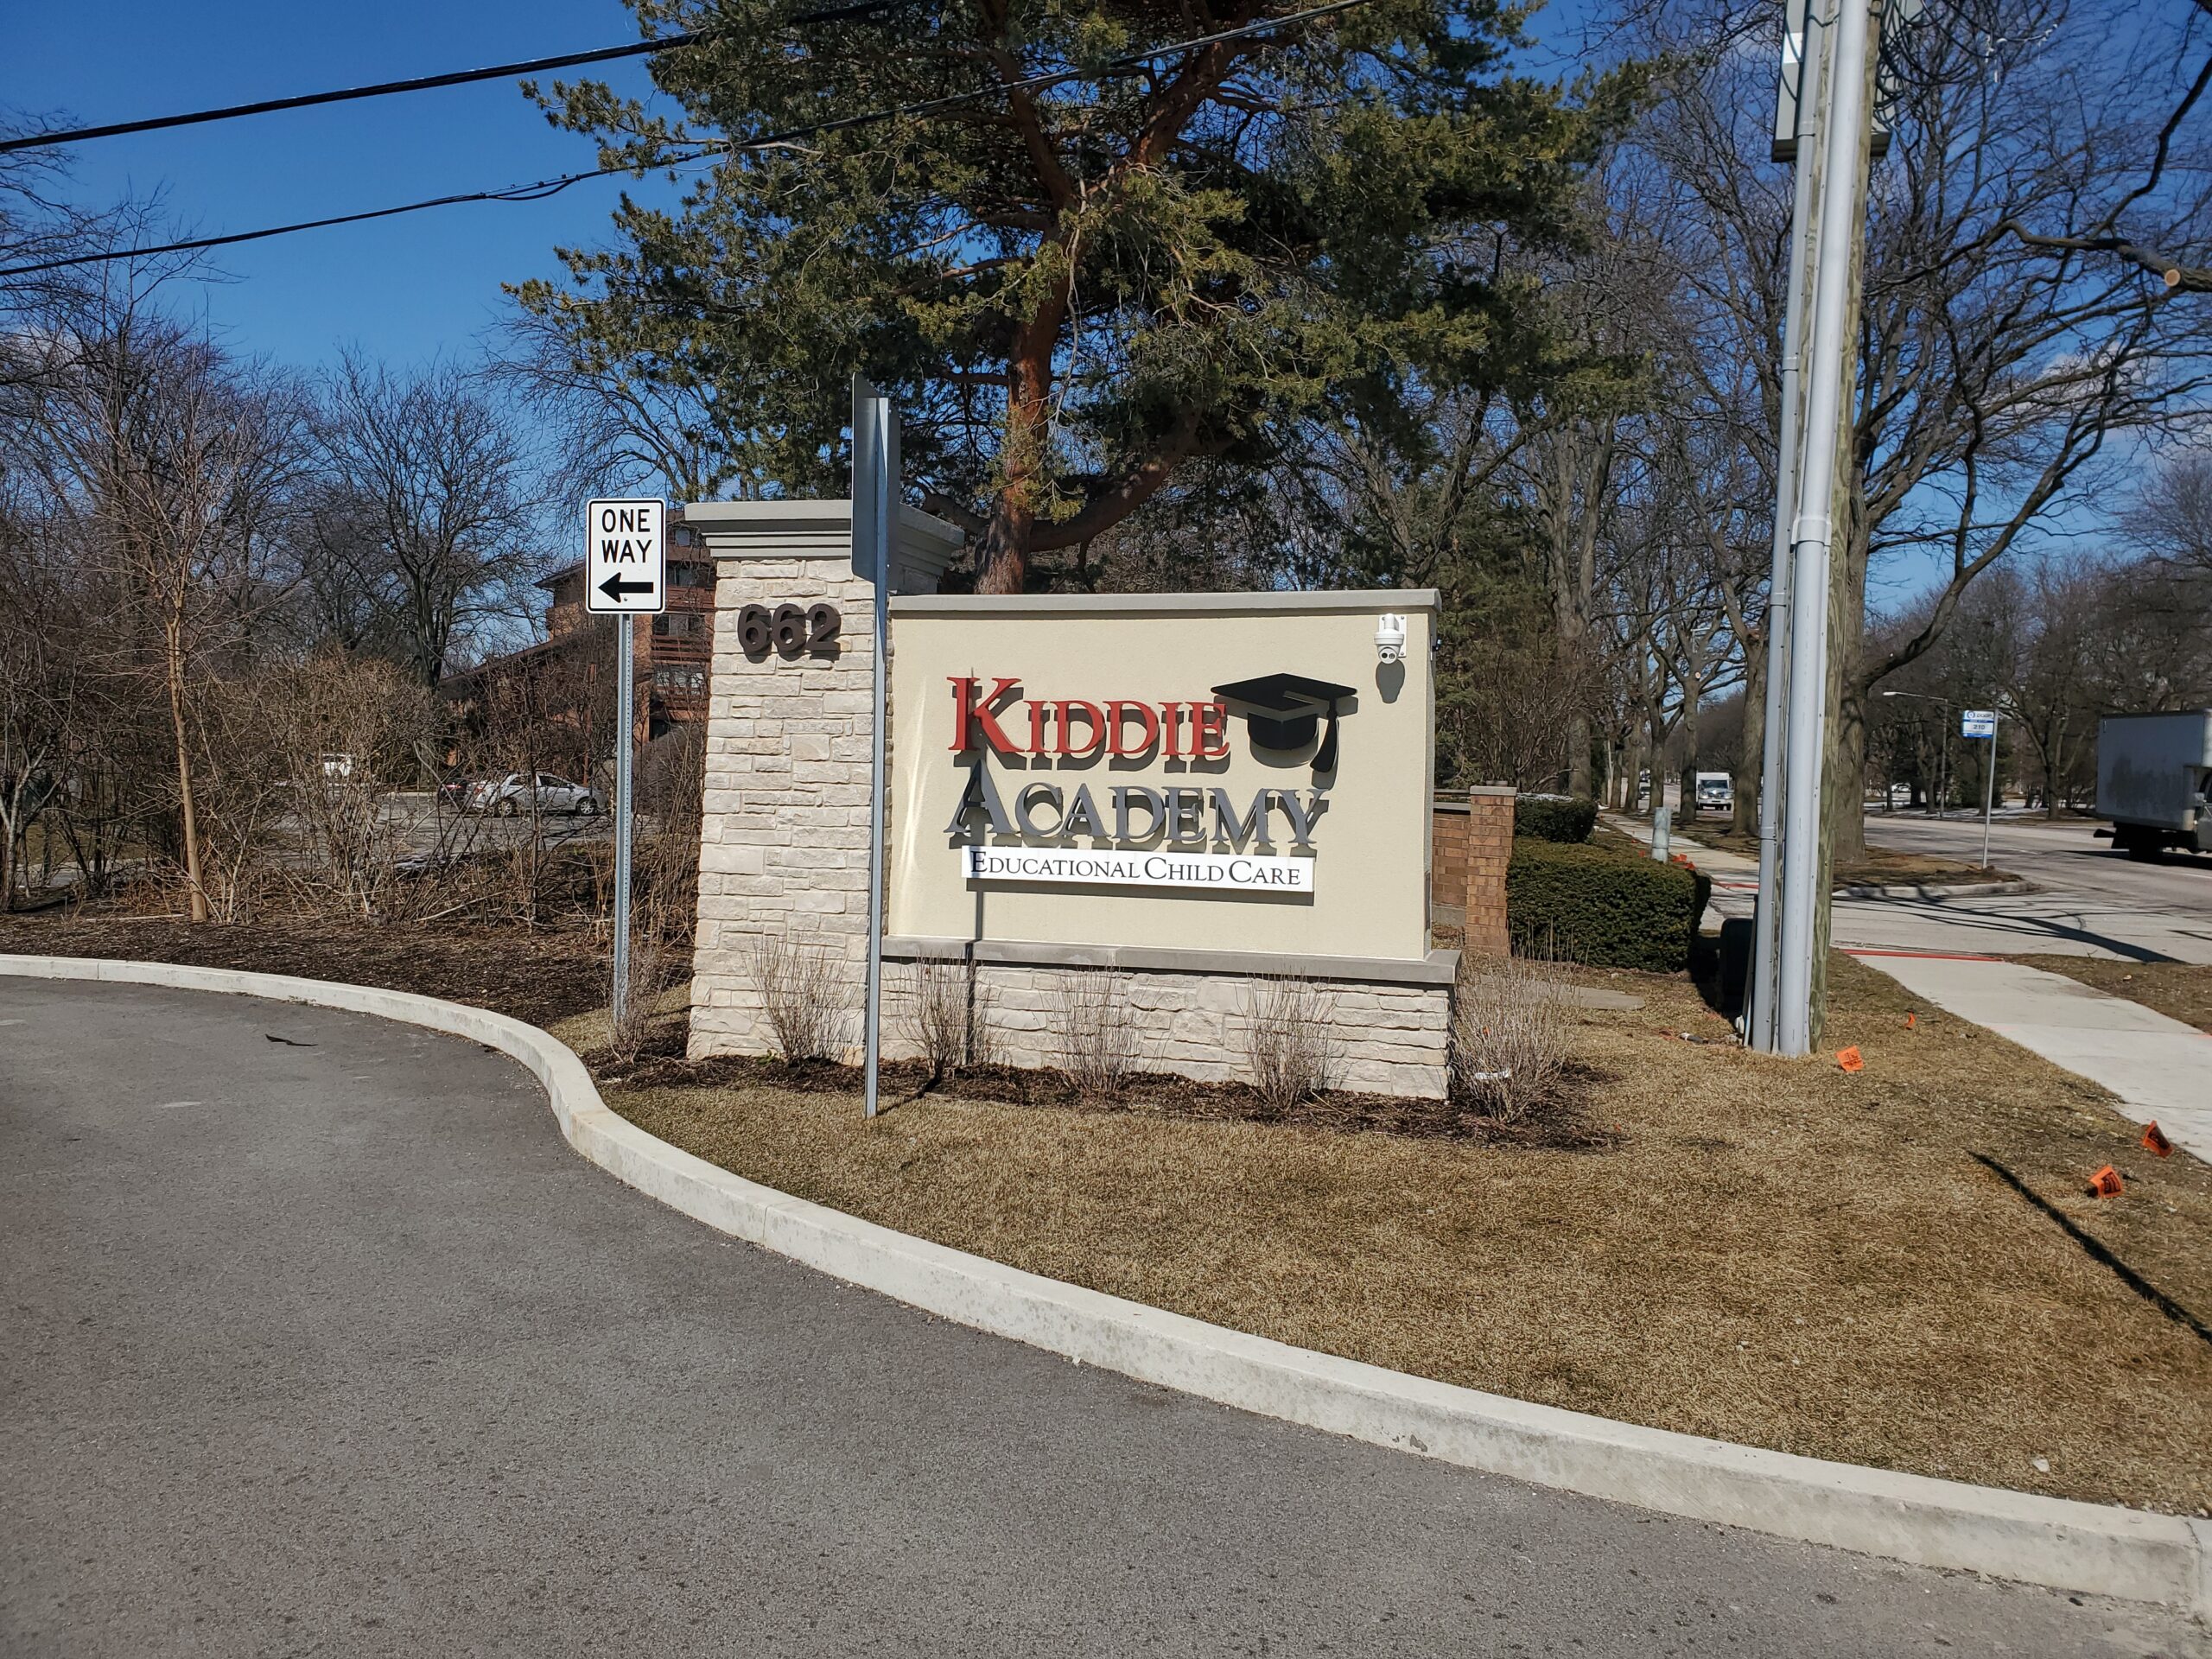 front entrance of Kiddie Academy Educational Child Care that includes exterior signage